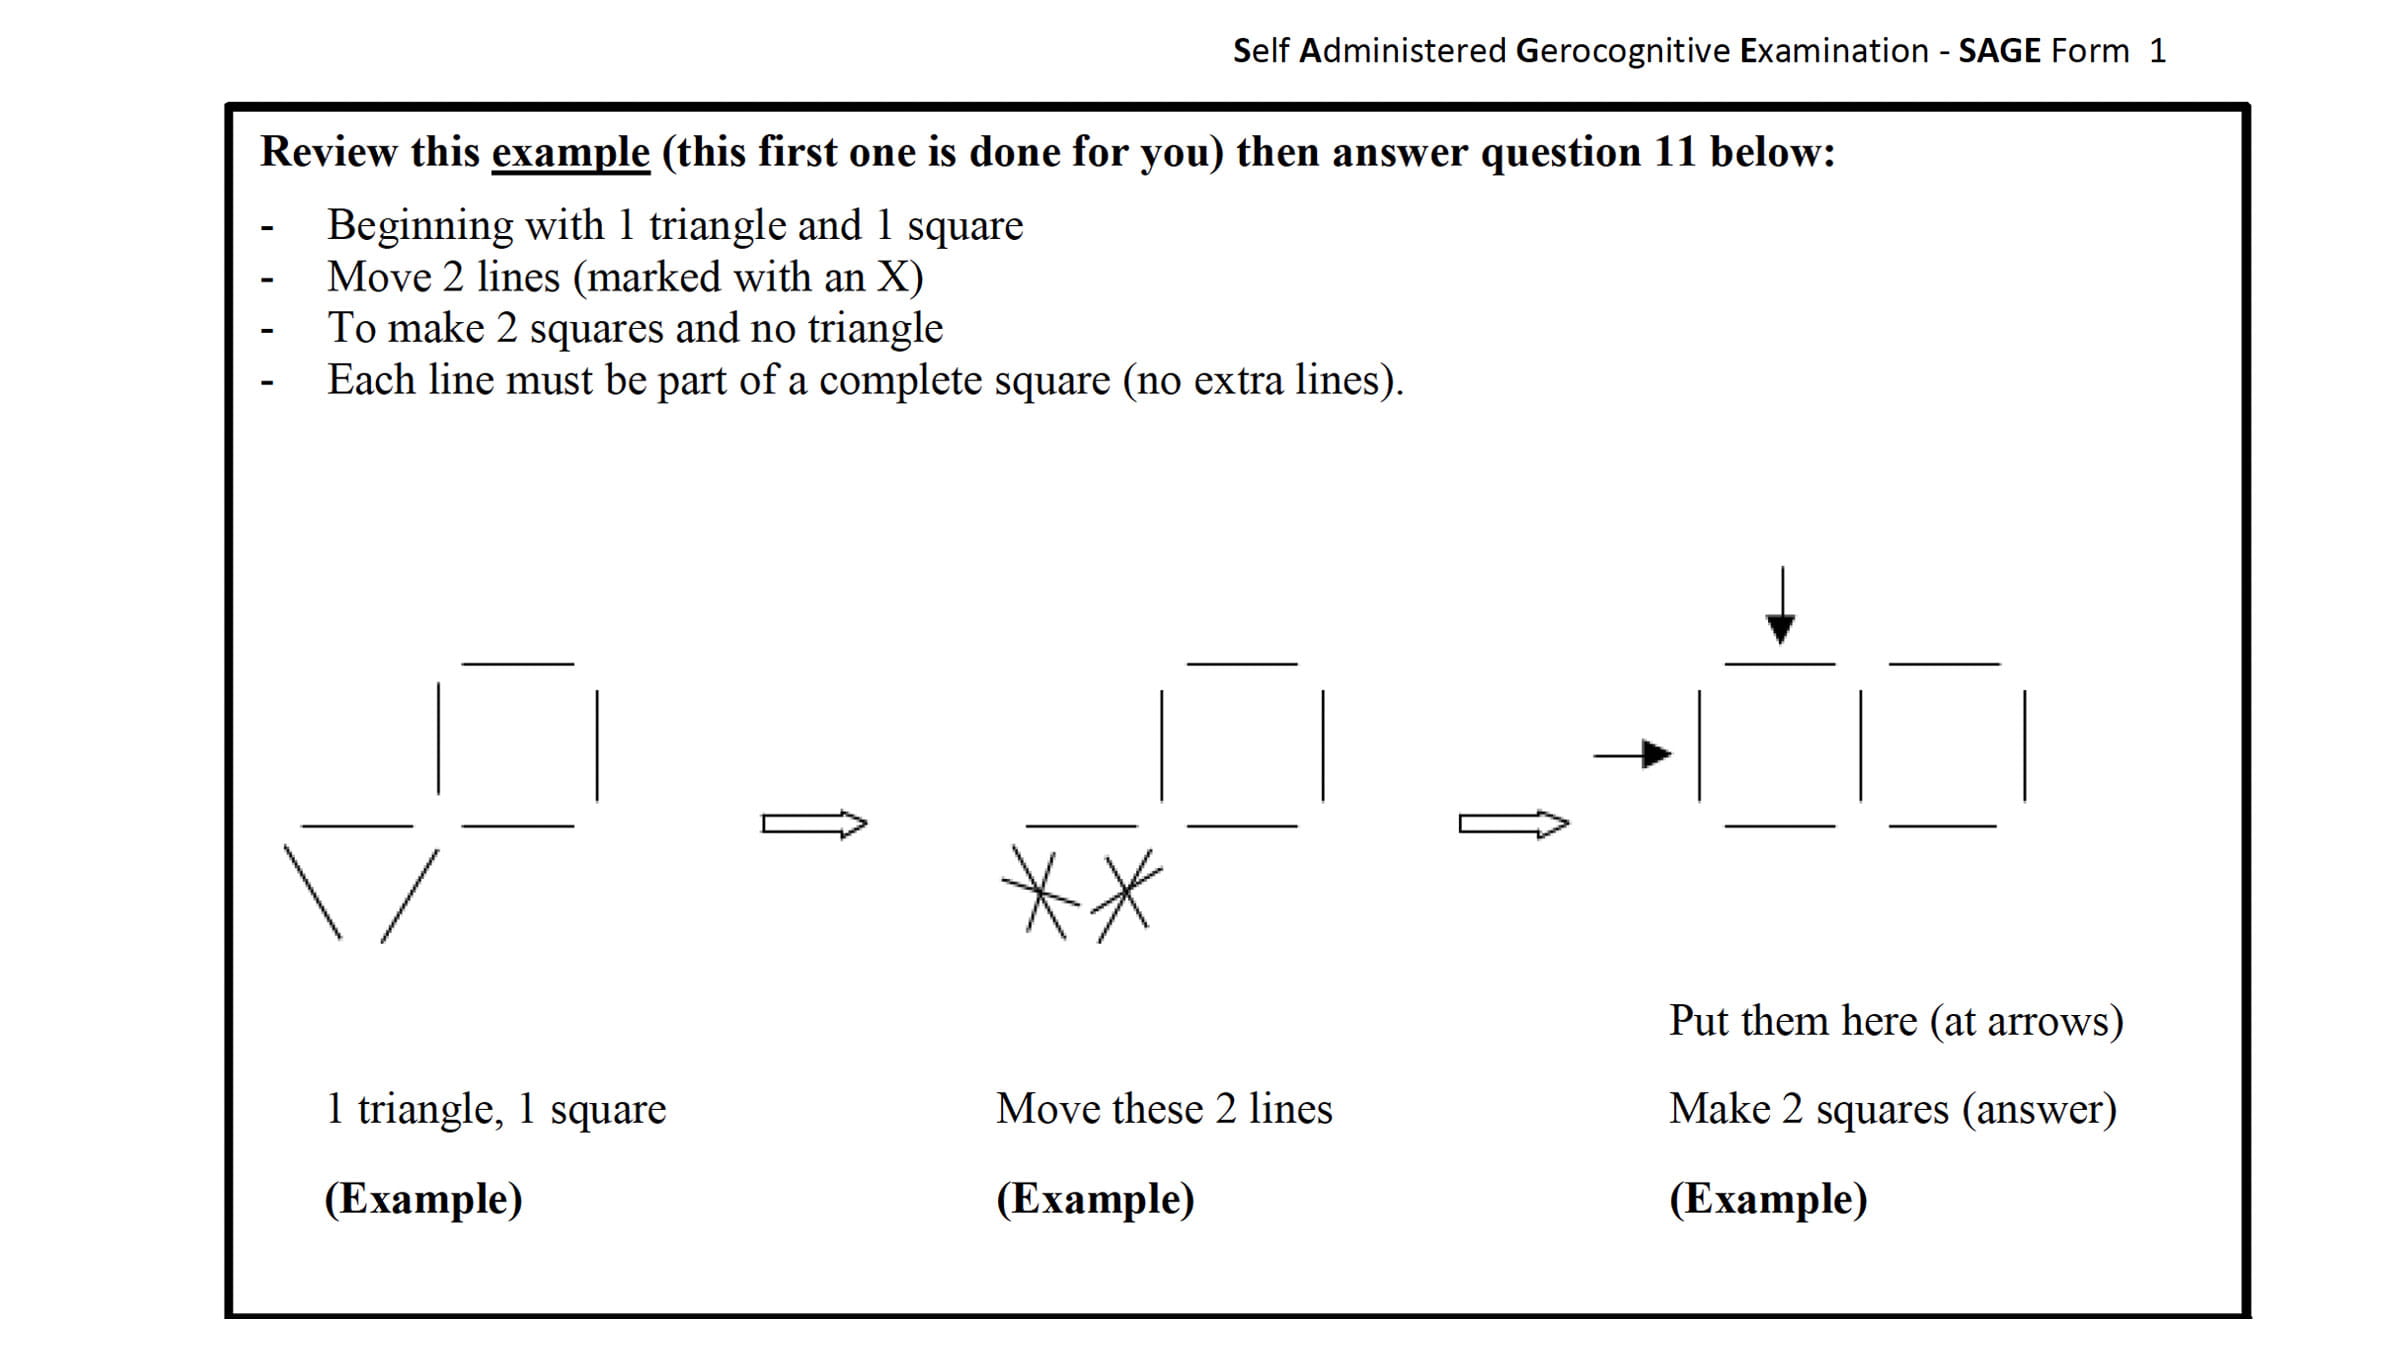 Sample question from the SAGE test